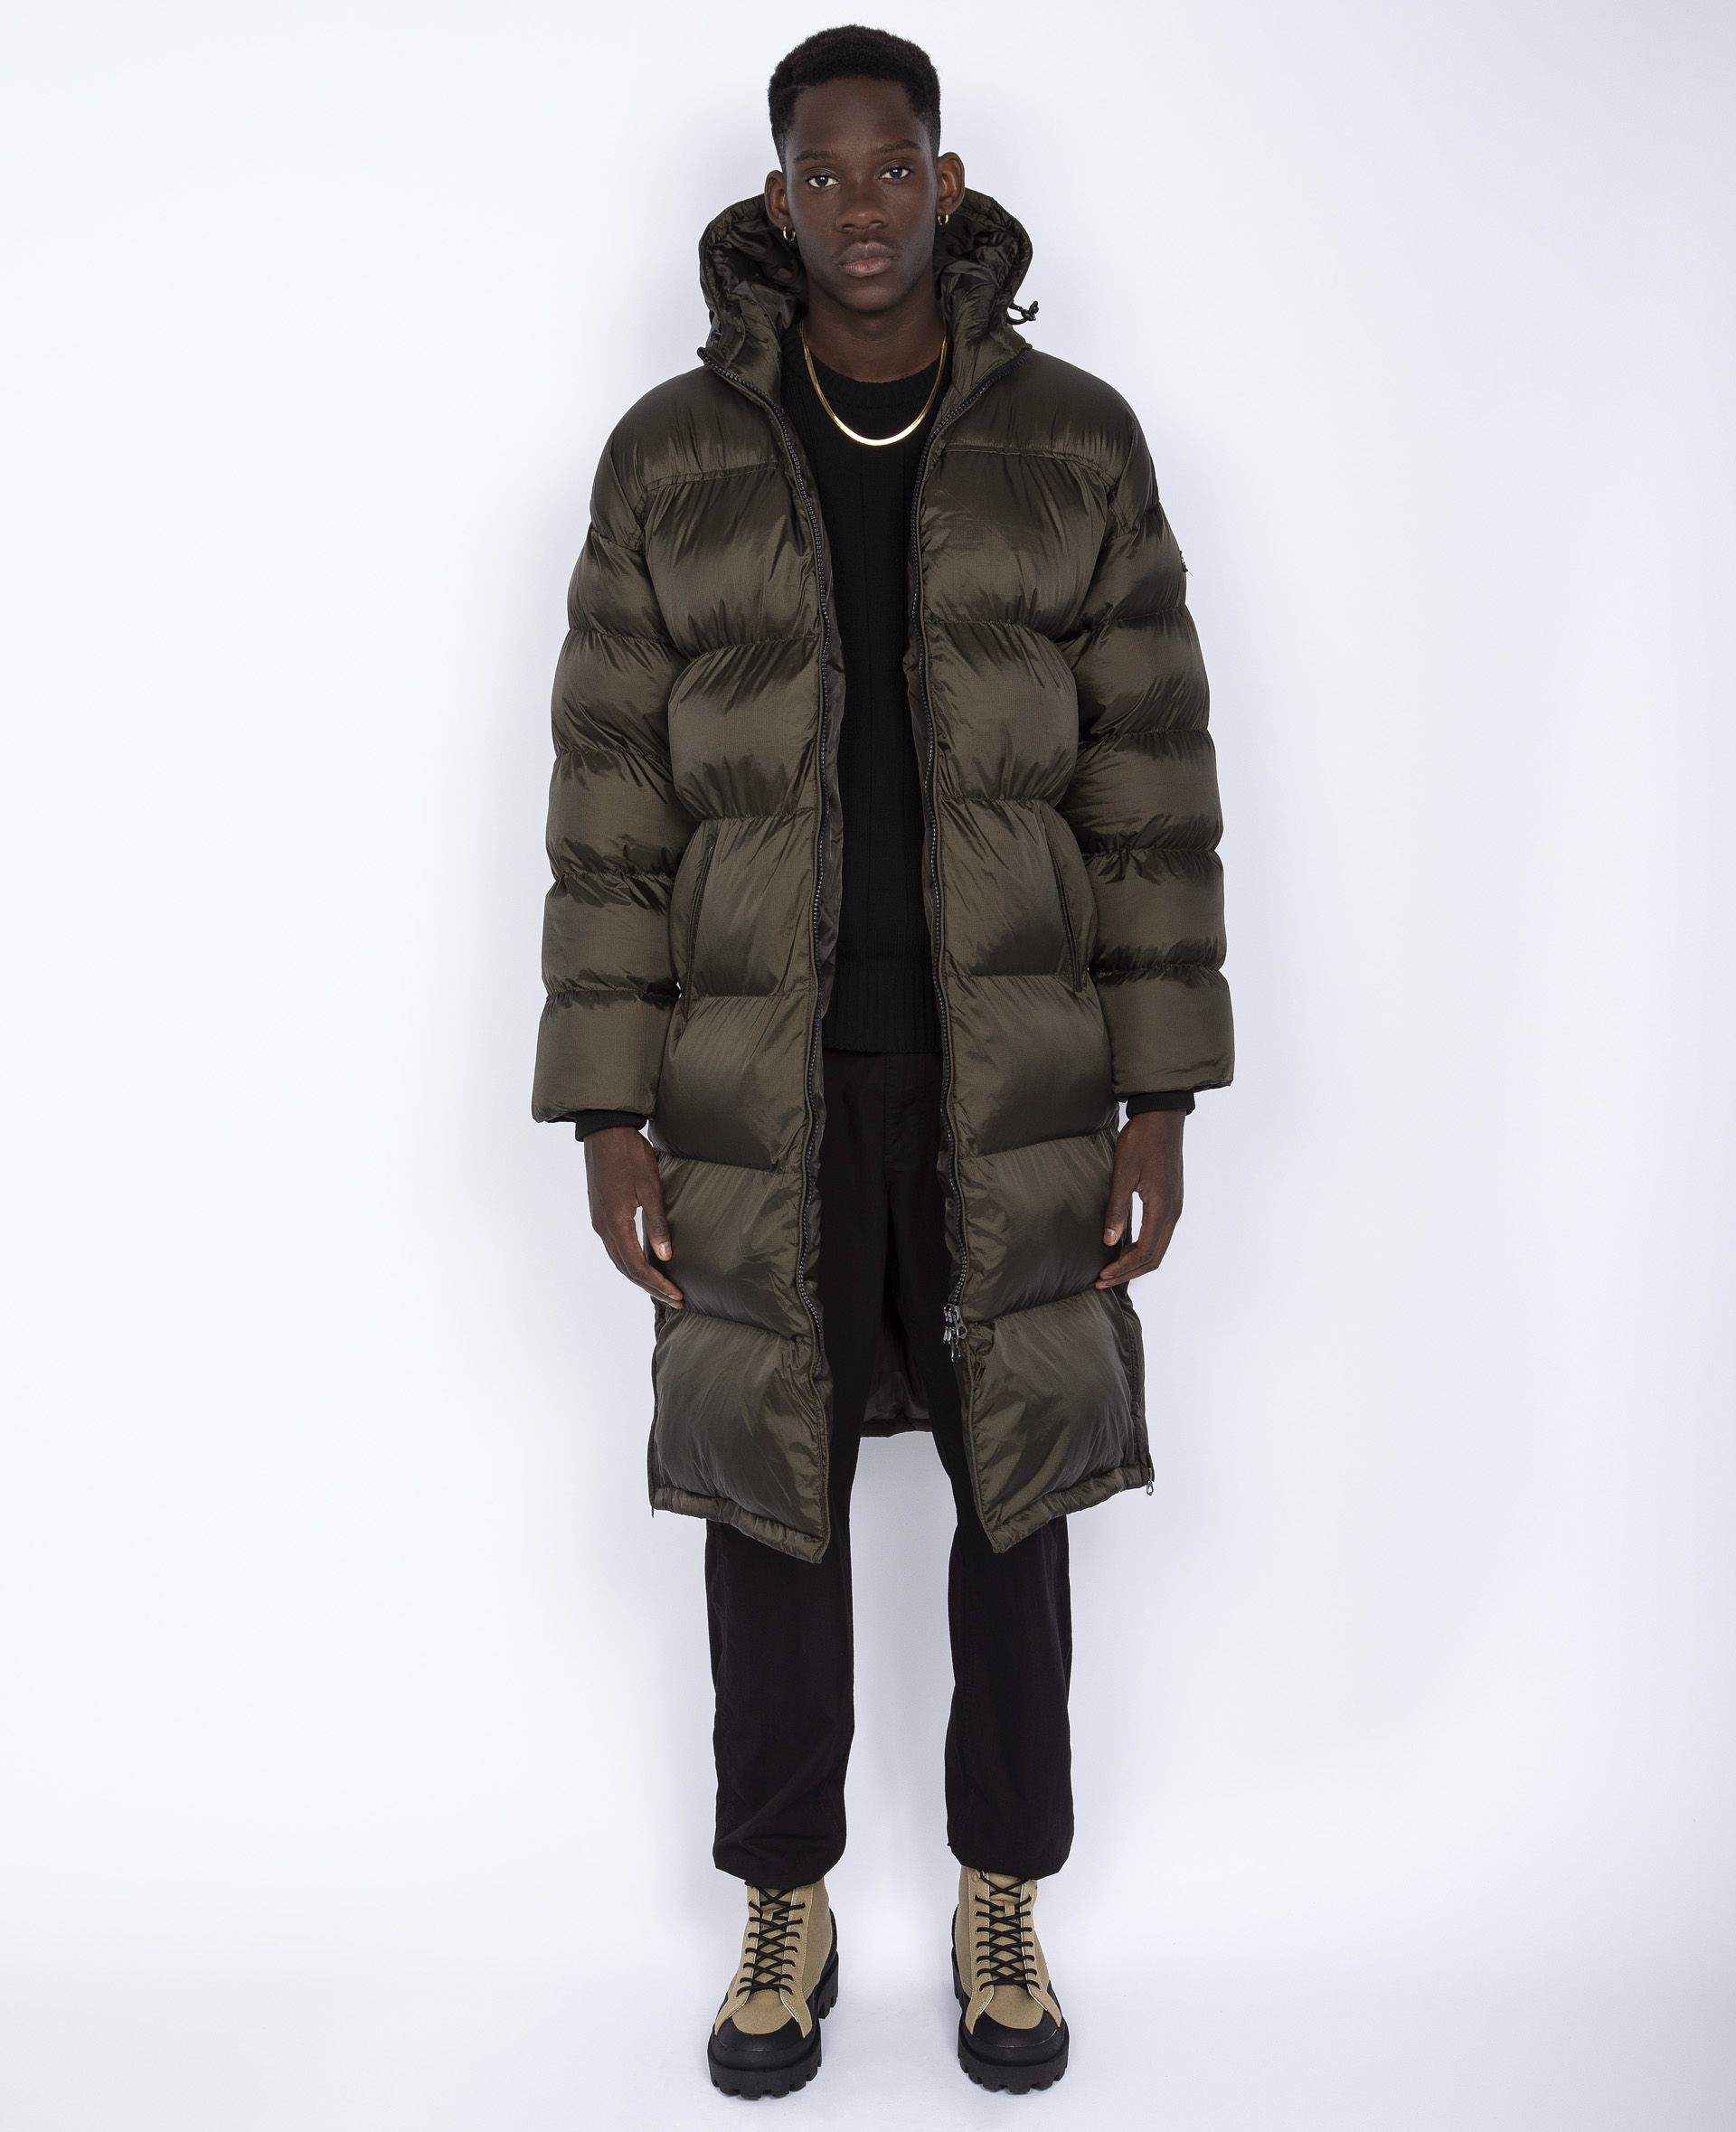 Represent Initial Hooded Puffer Jacket - Farfetch